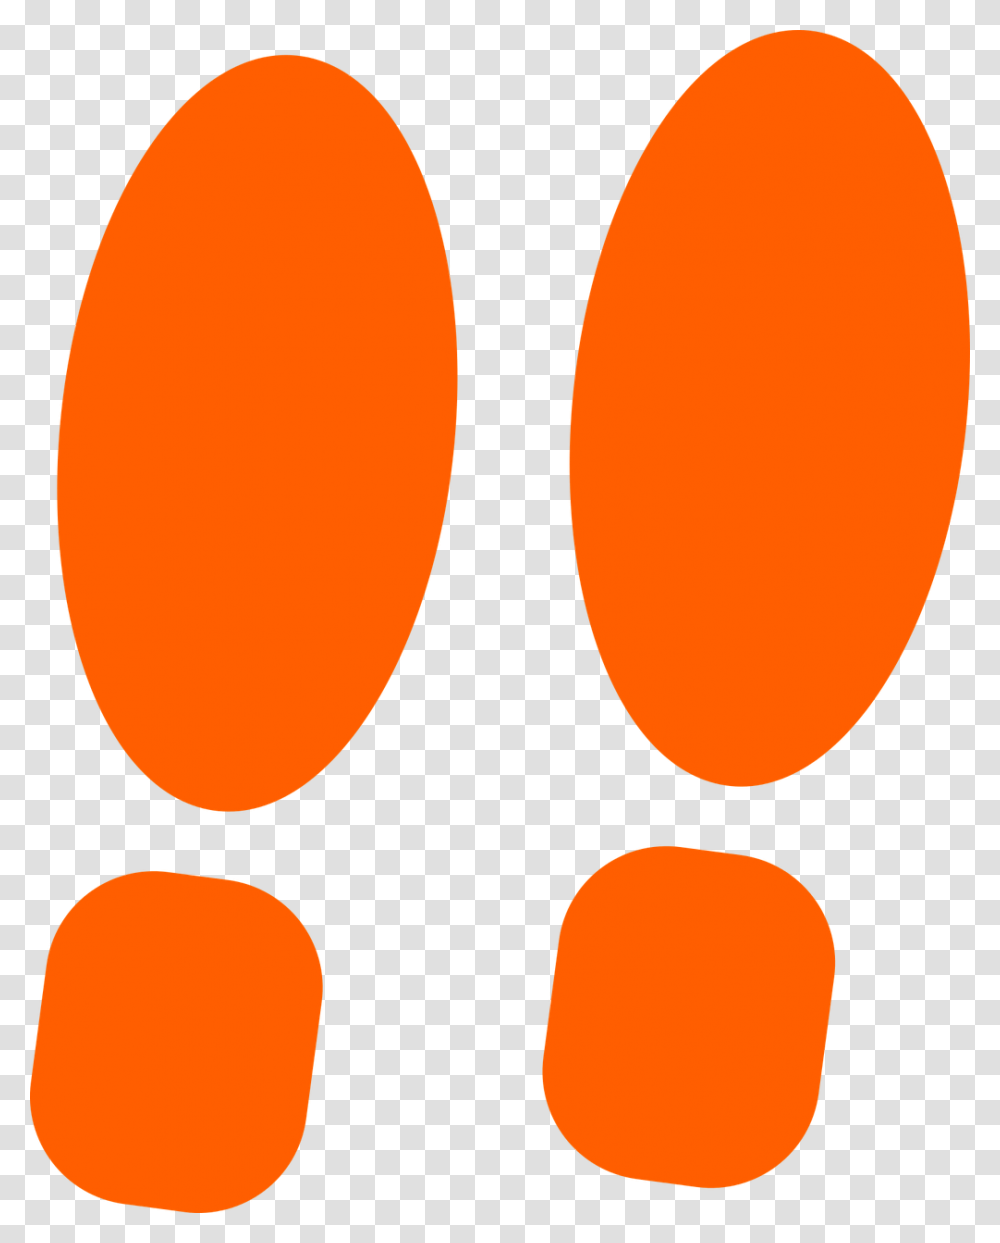 Footsteps Steps Icon Orange Footsteps, Balloon, Cutlery, Tie, Accessories Transparent Png